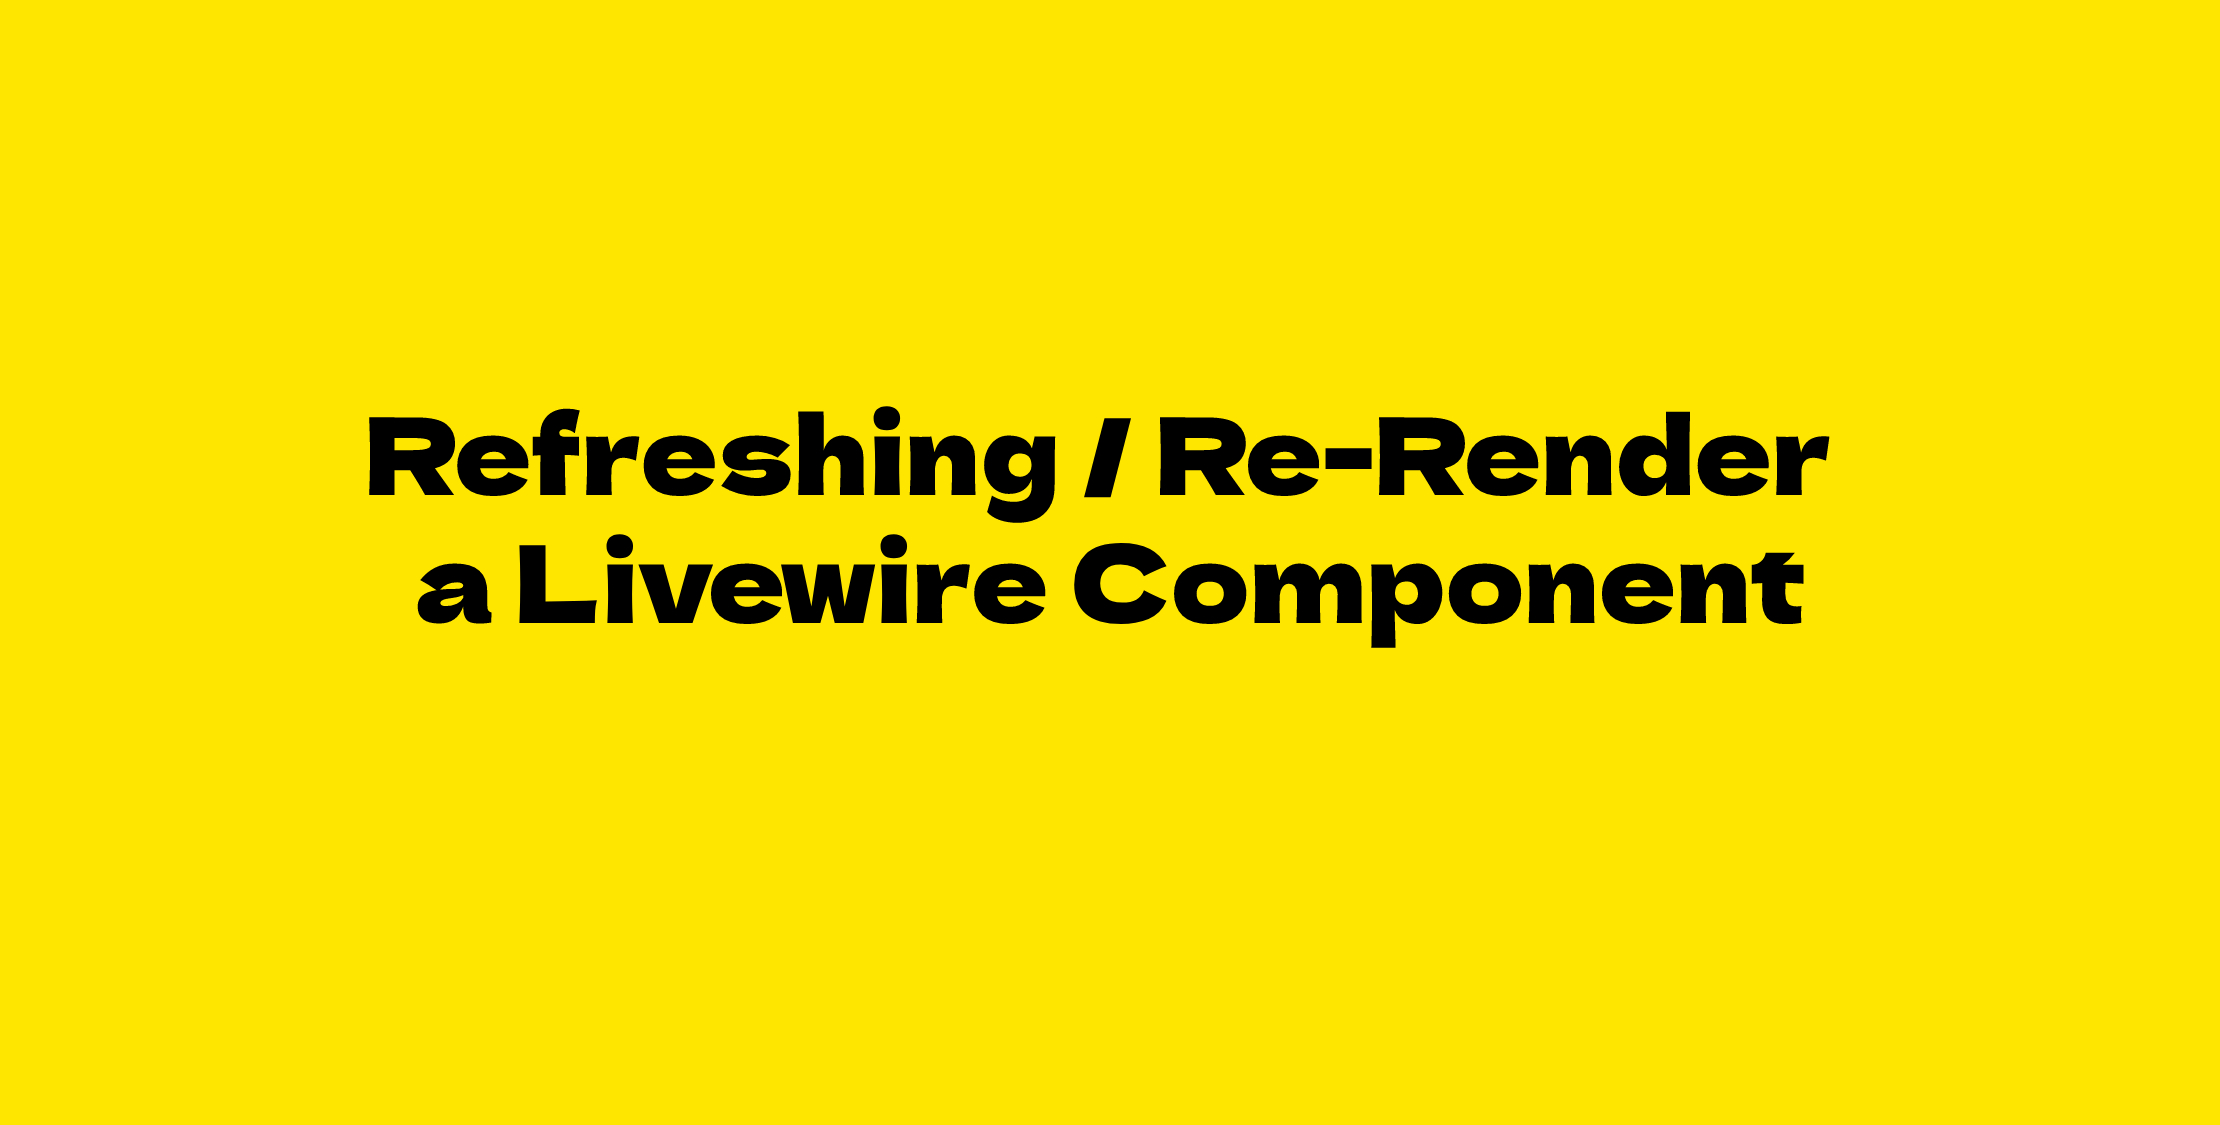 Refreshing / Re-Render a Livewire Component